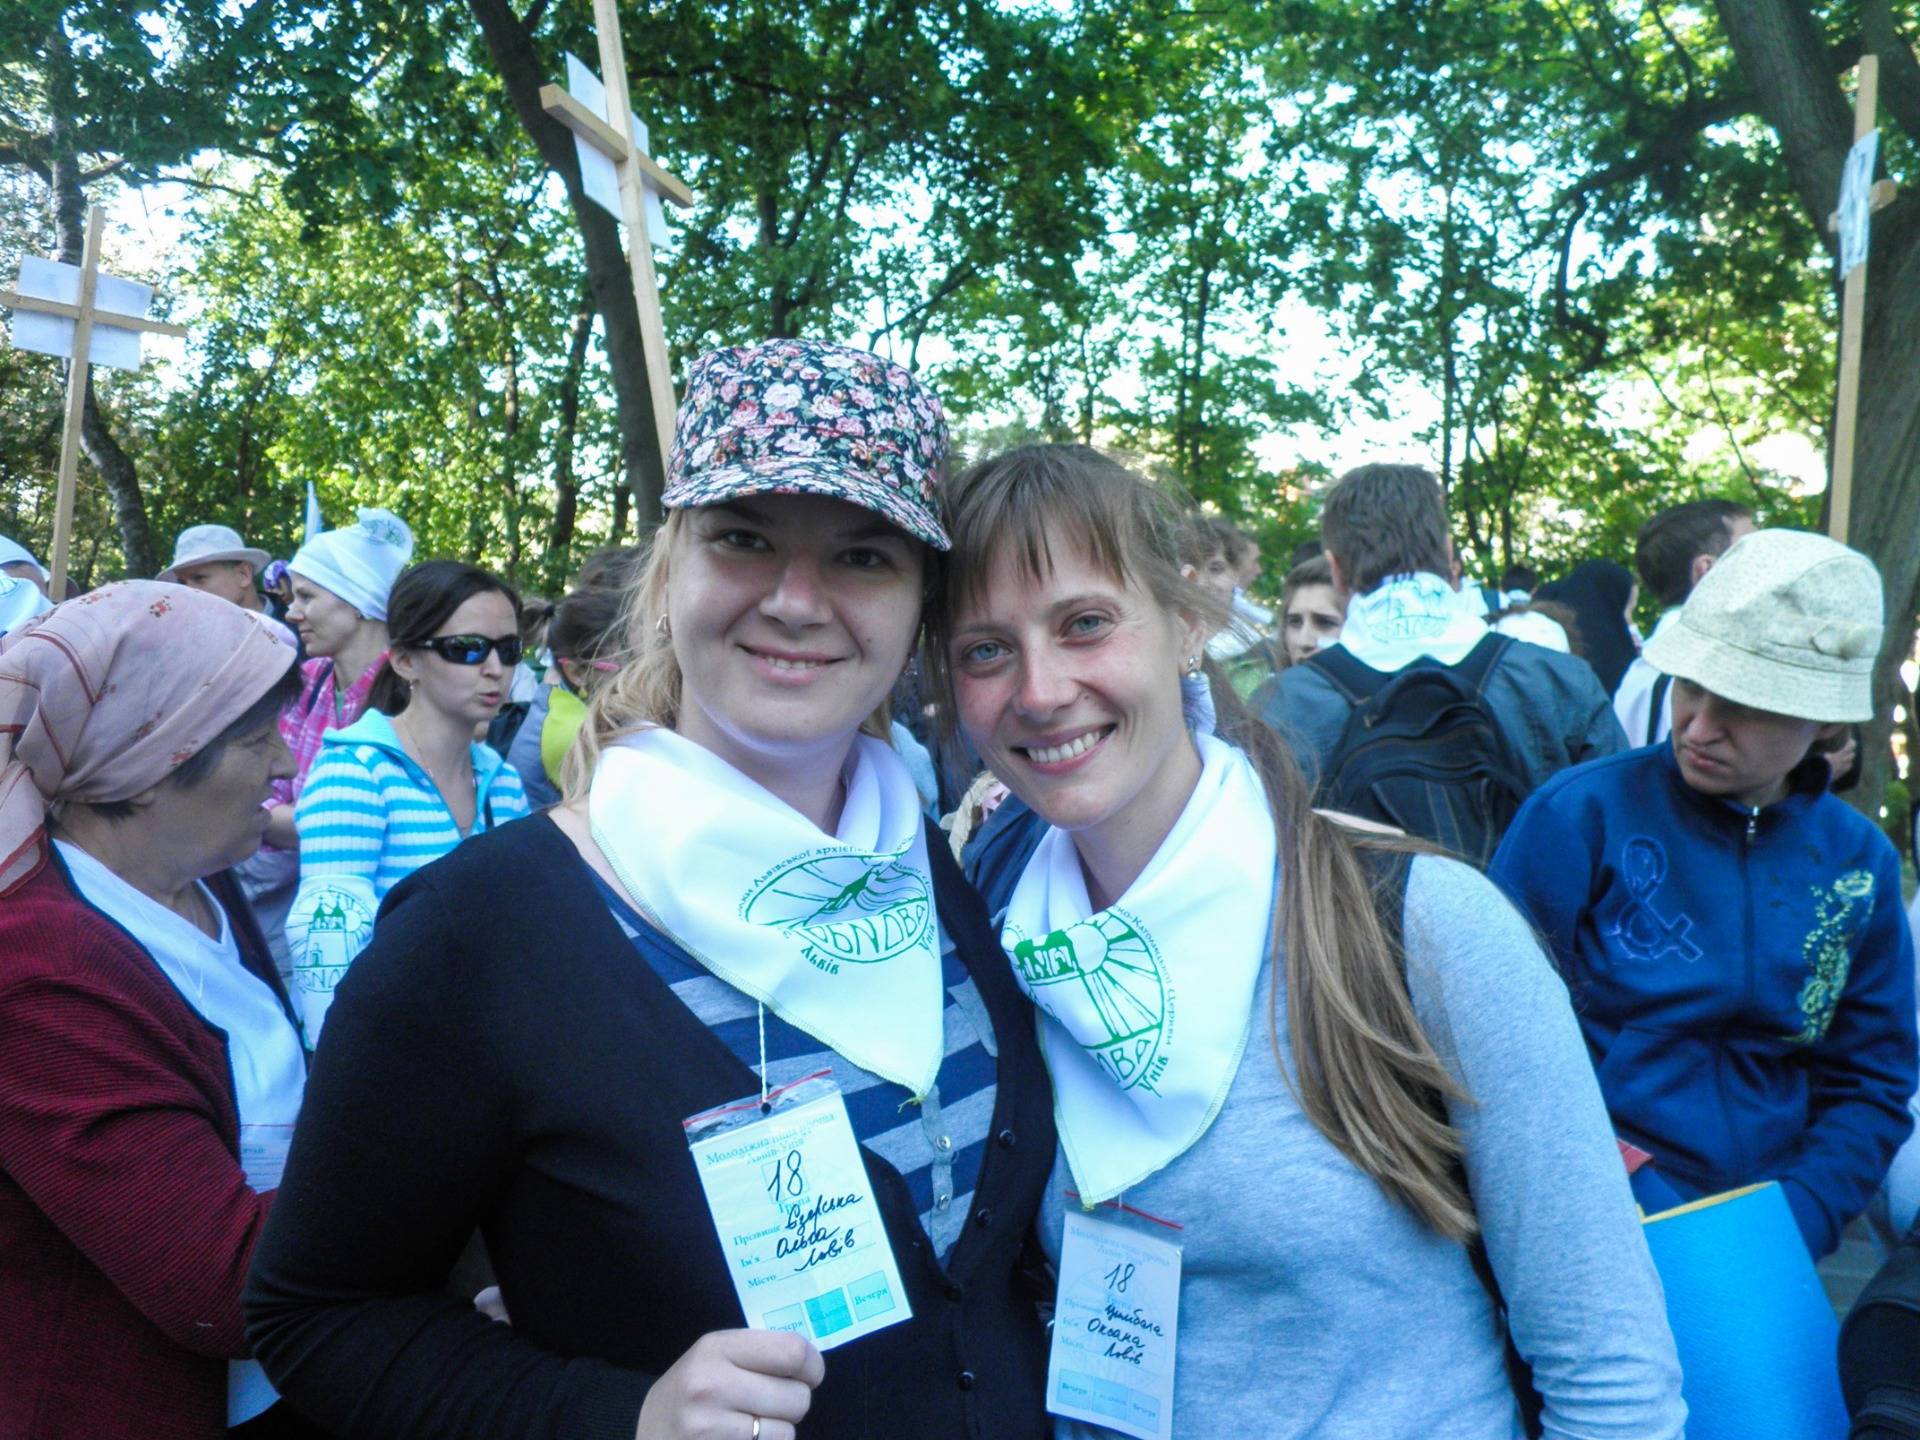 My wife and her friend at the start of the pilgrimage